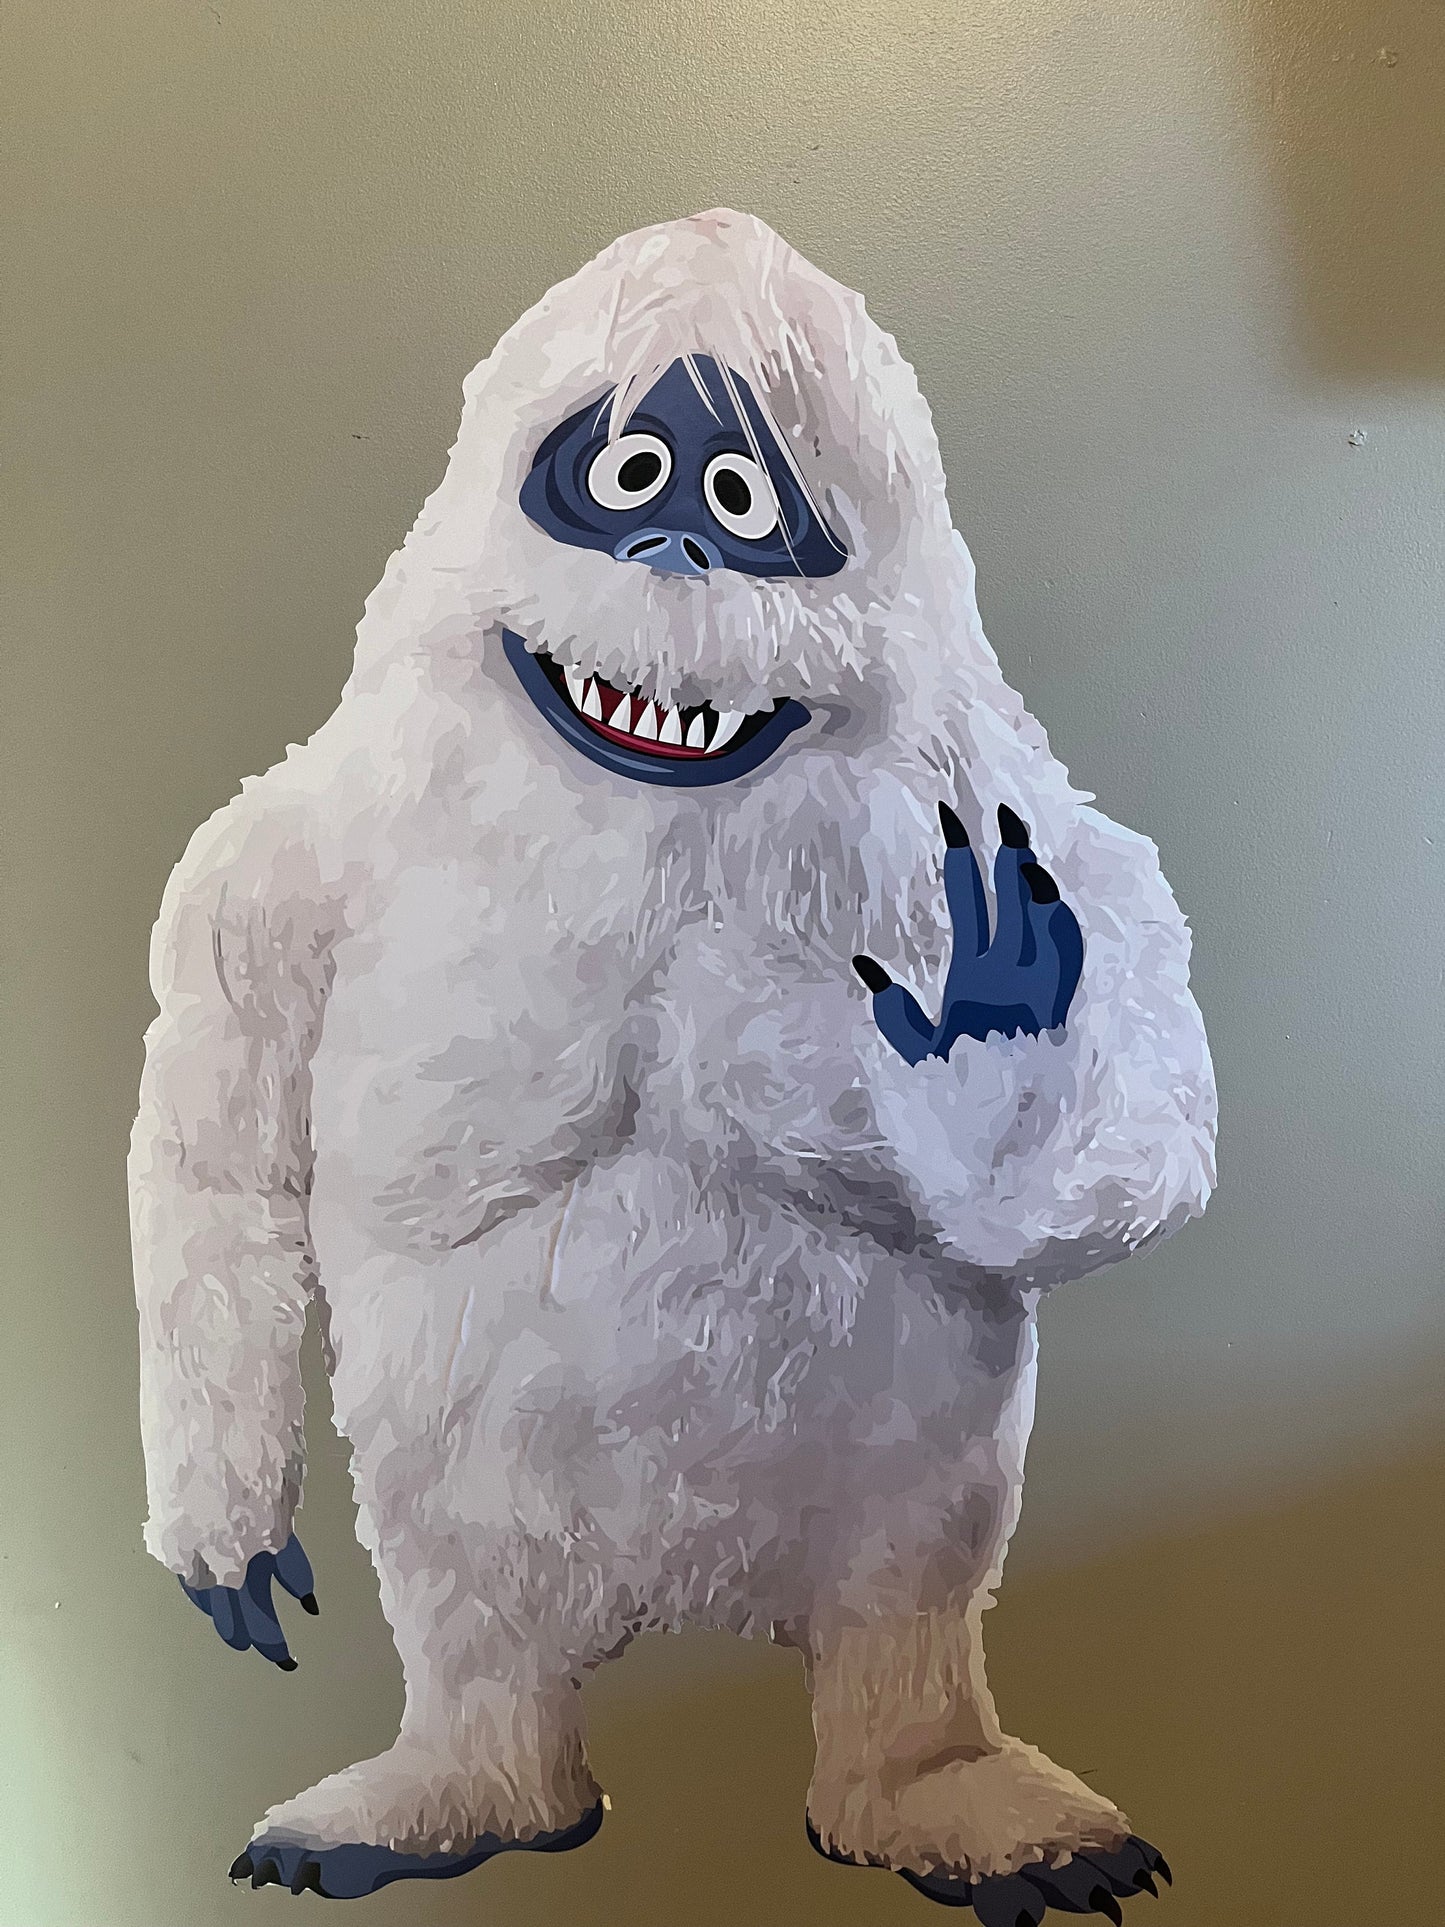 Yeti wall cling Almost 3ft tall. Christmas Movie Decorations. Easily remove and replace